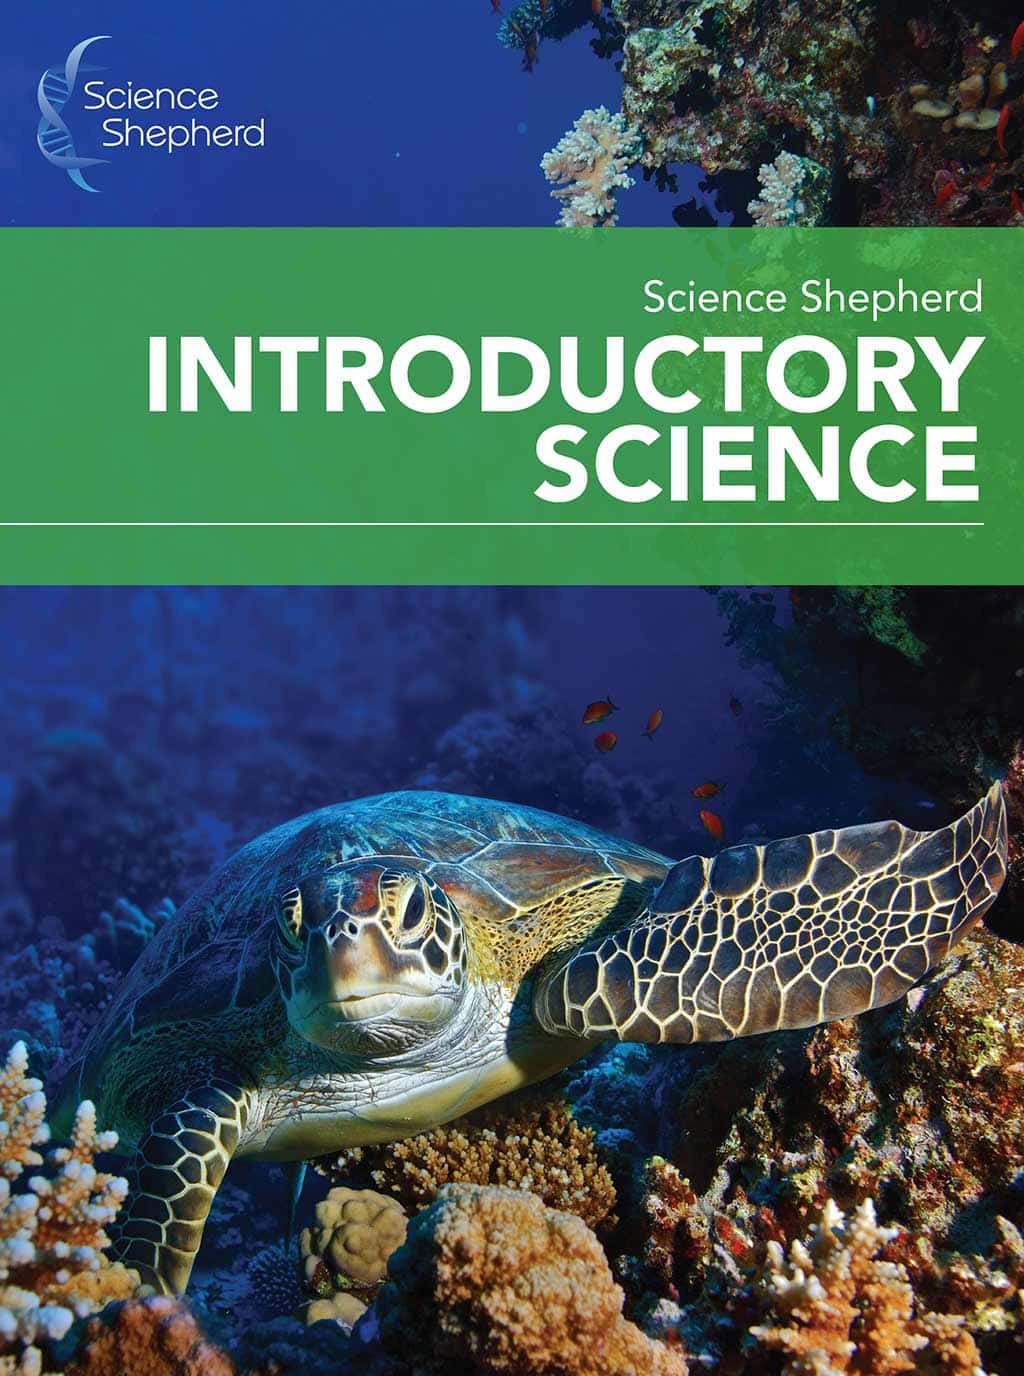 Homeschool elementary science curriculum cover of a sea turtle and coral